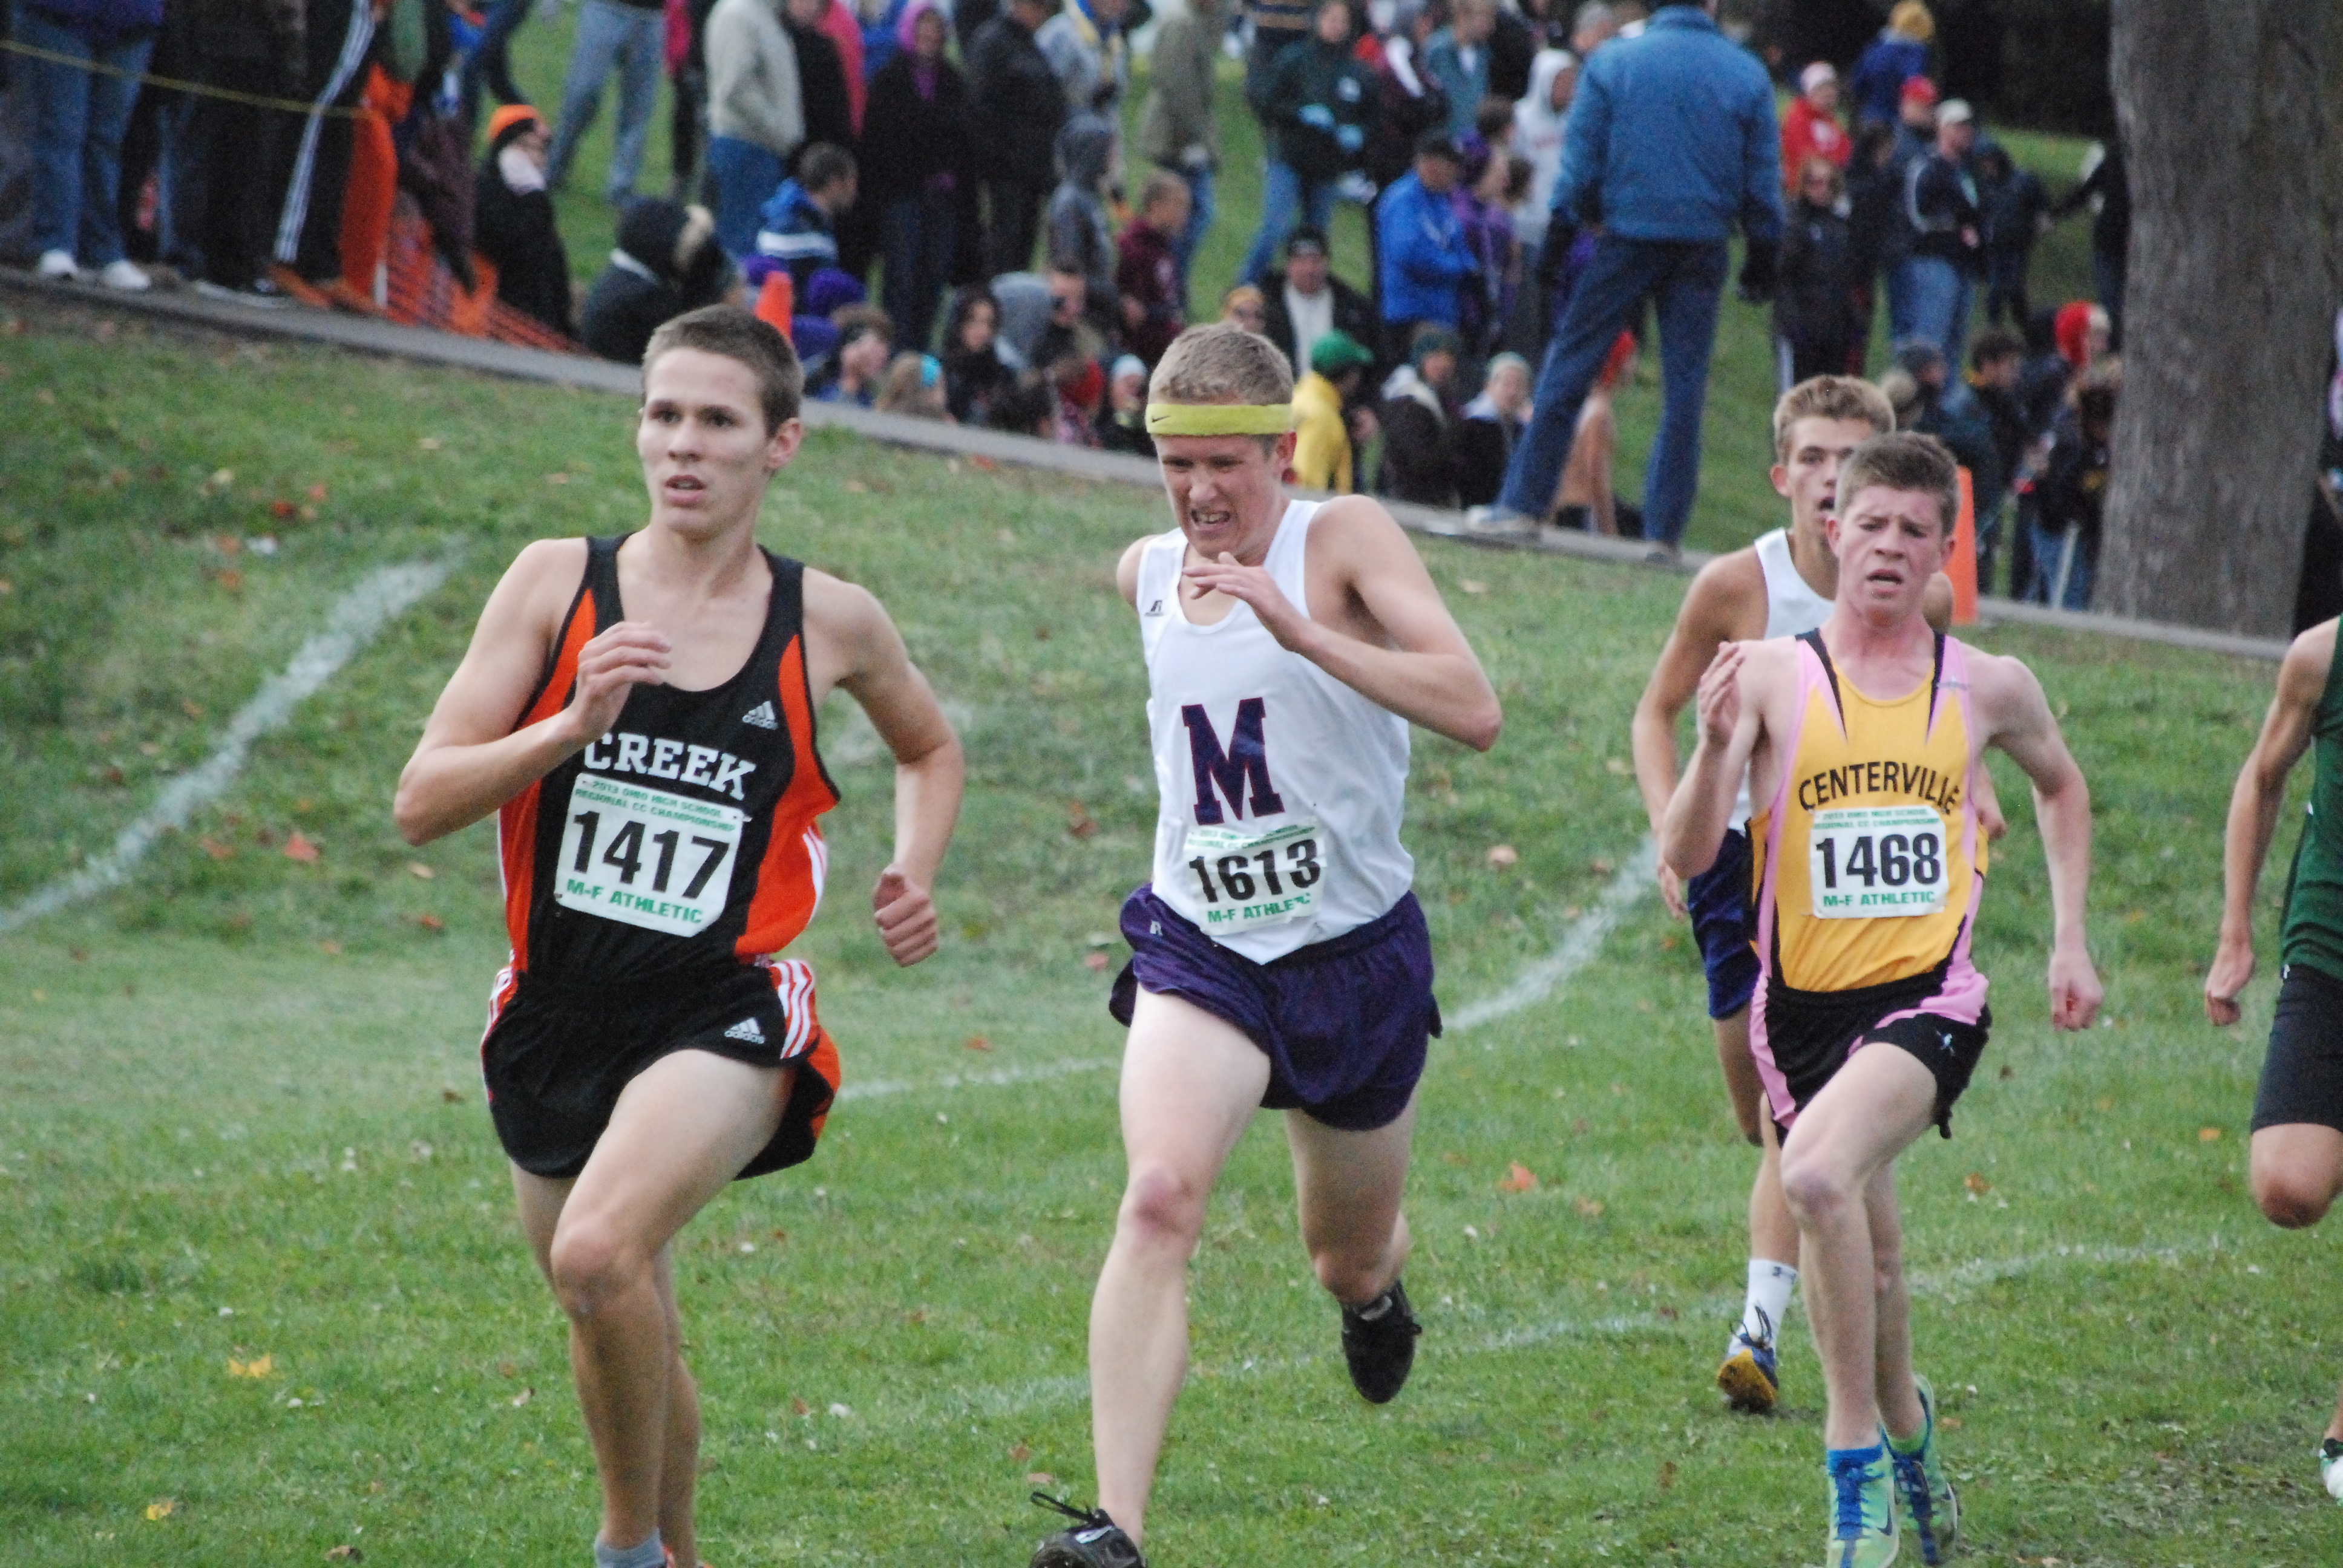 Middletown's Will Parsons ran a personal-best time in Saturday's Division I regional cross country meet in Troy, but he came up a few spots shy of advancing to the state meet.